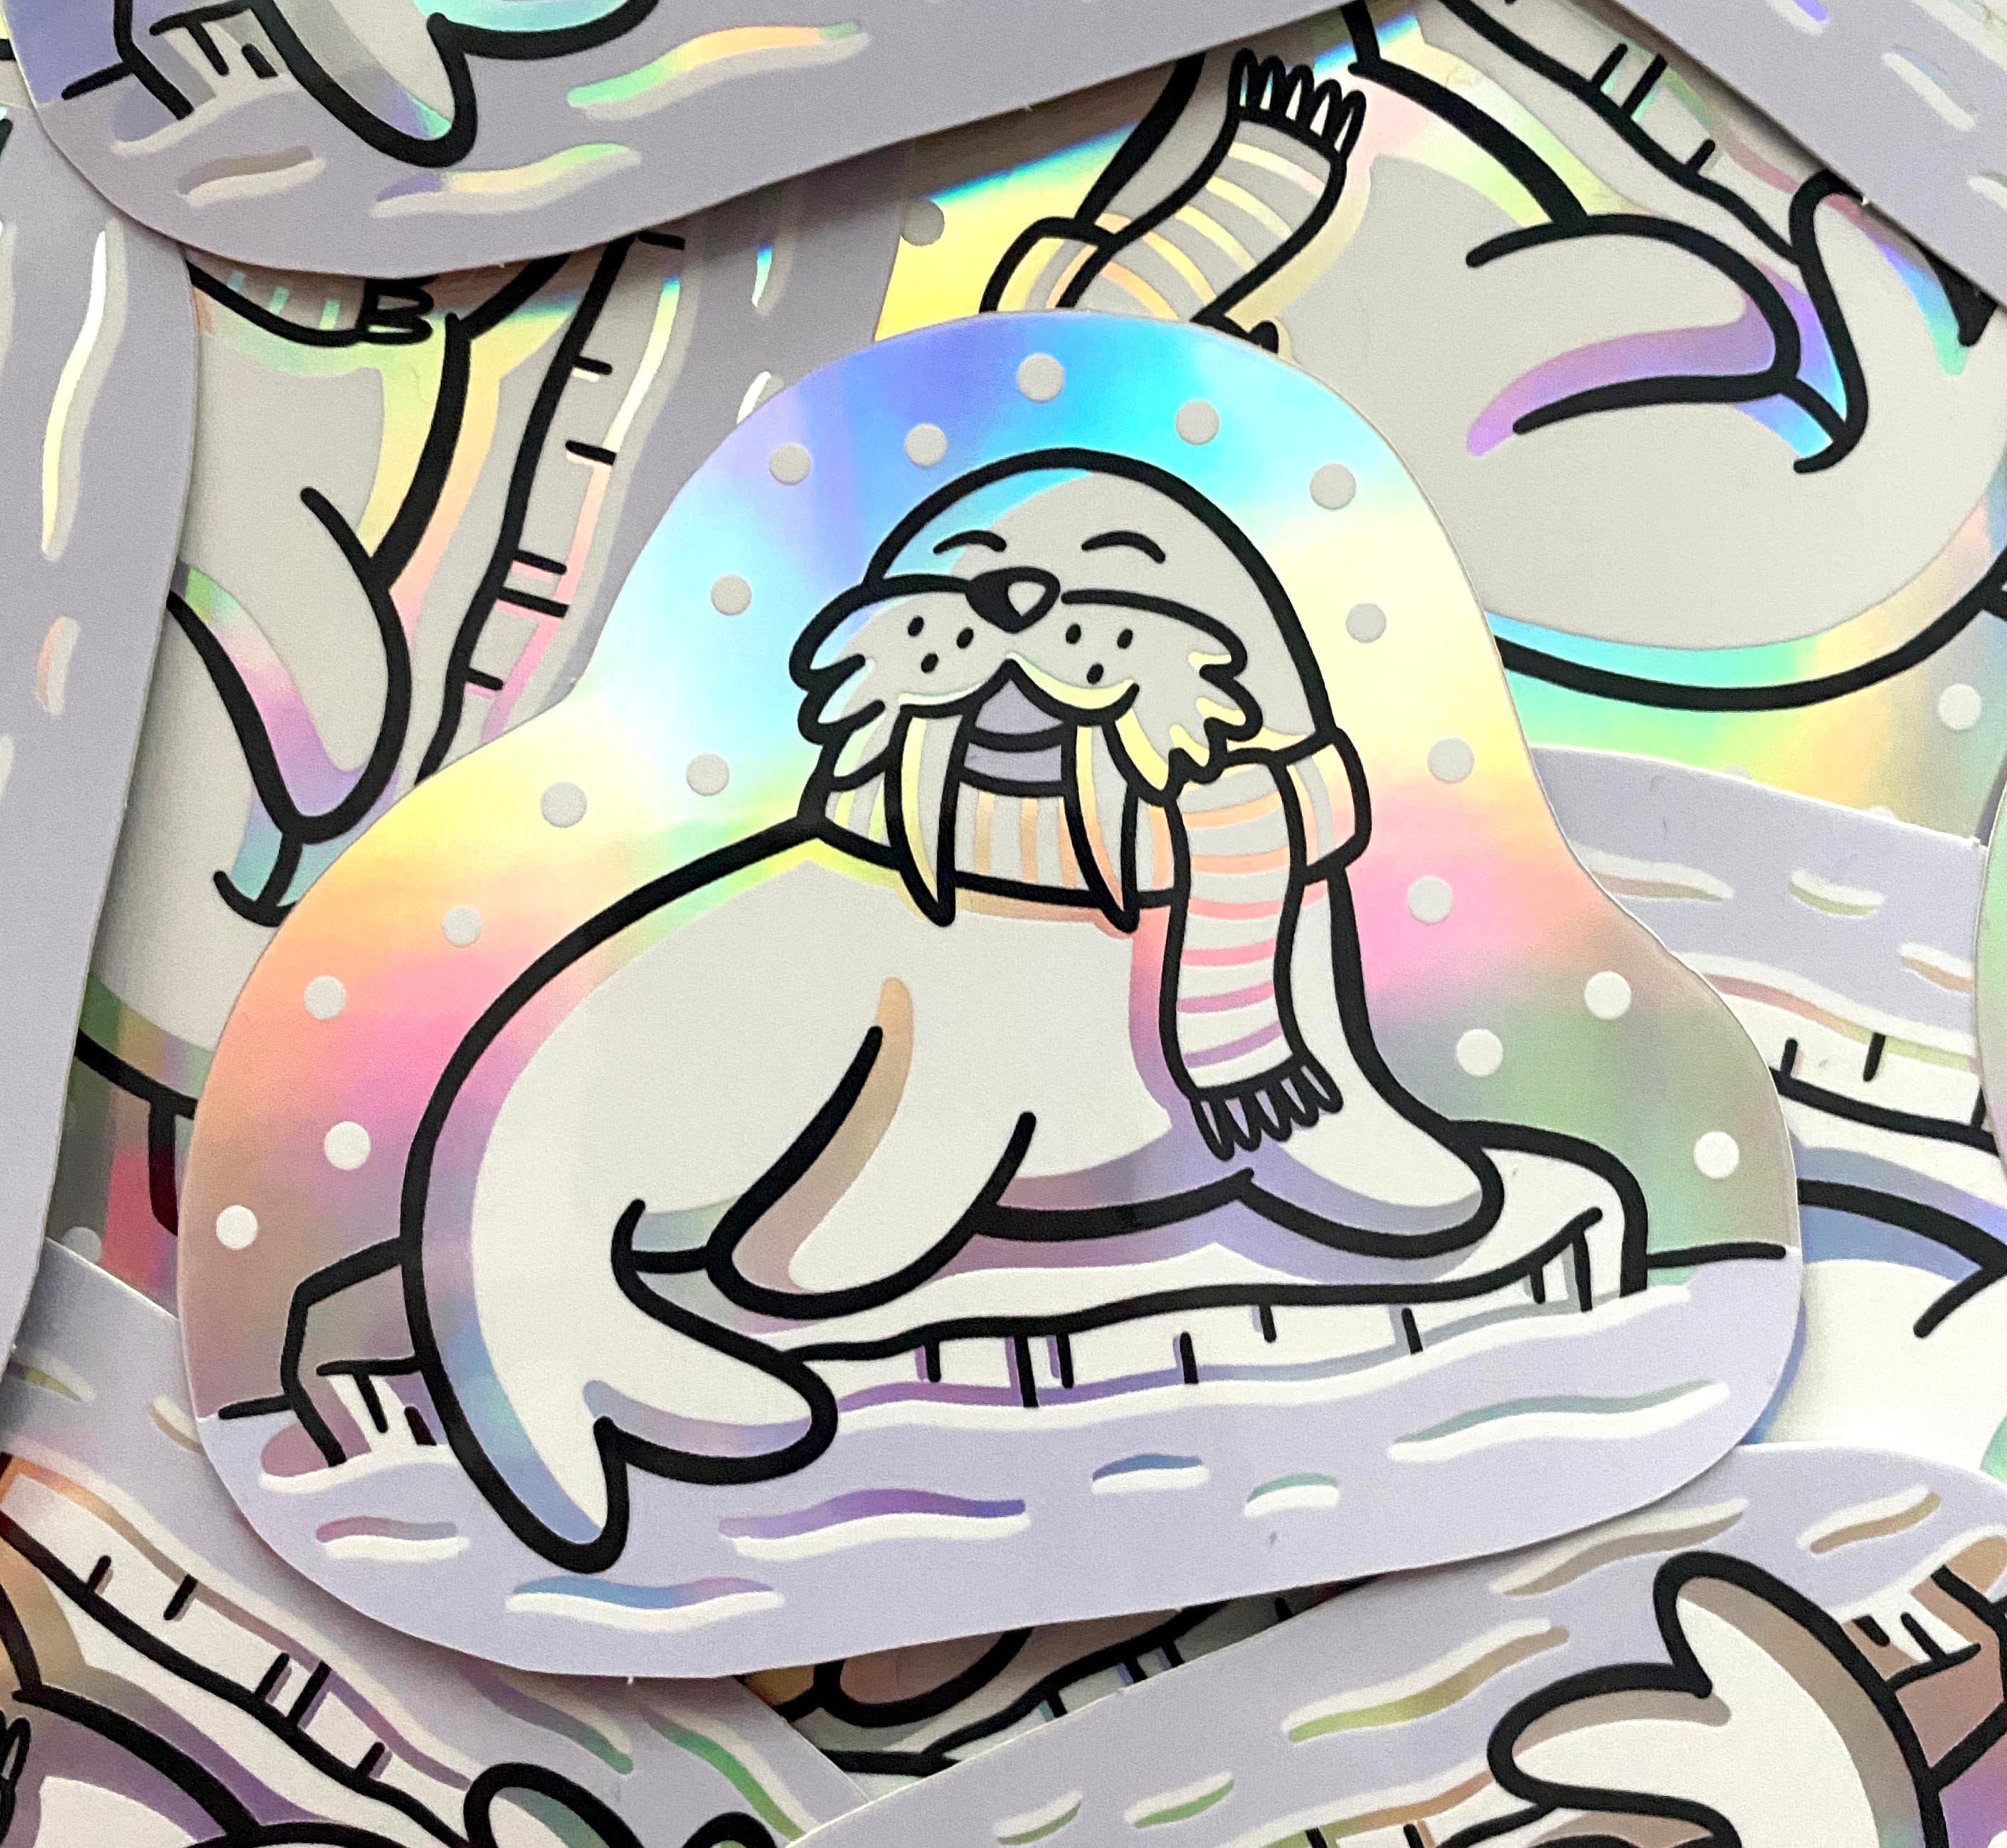 Walrus Holographic Sticker (Discontinued!)